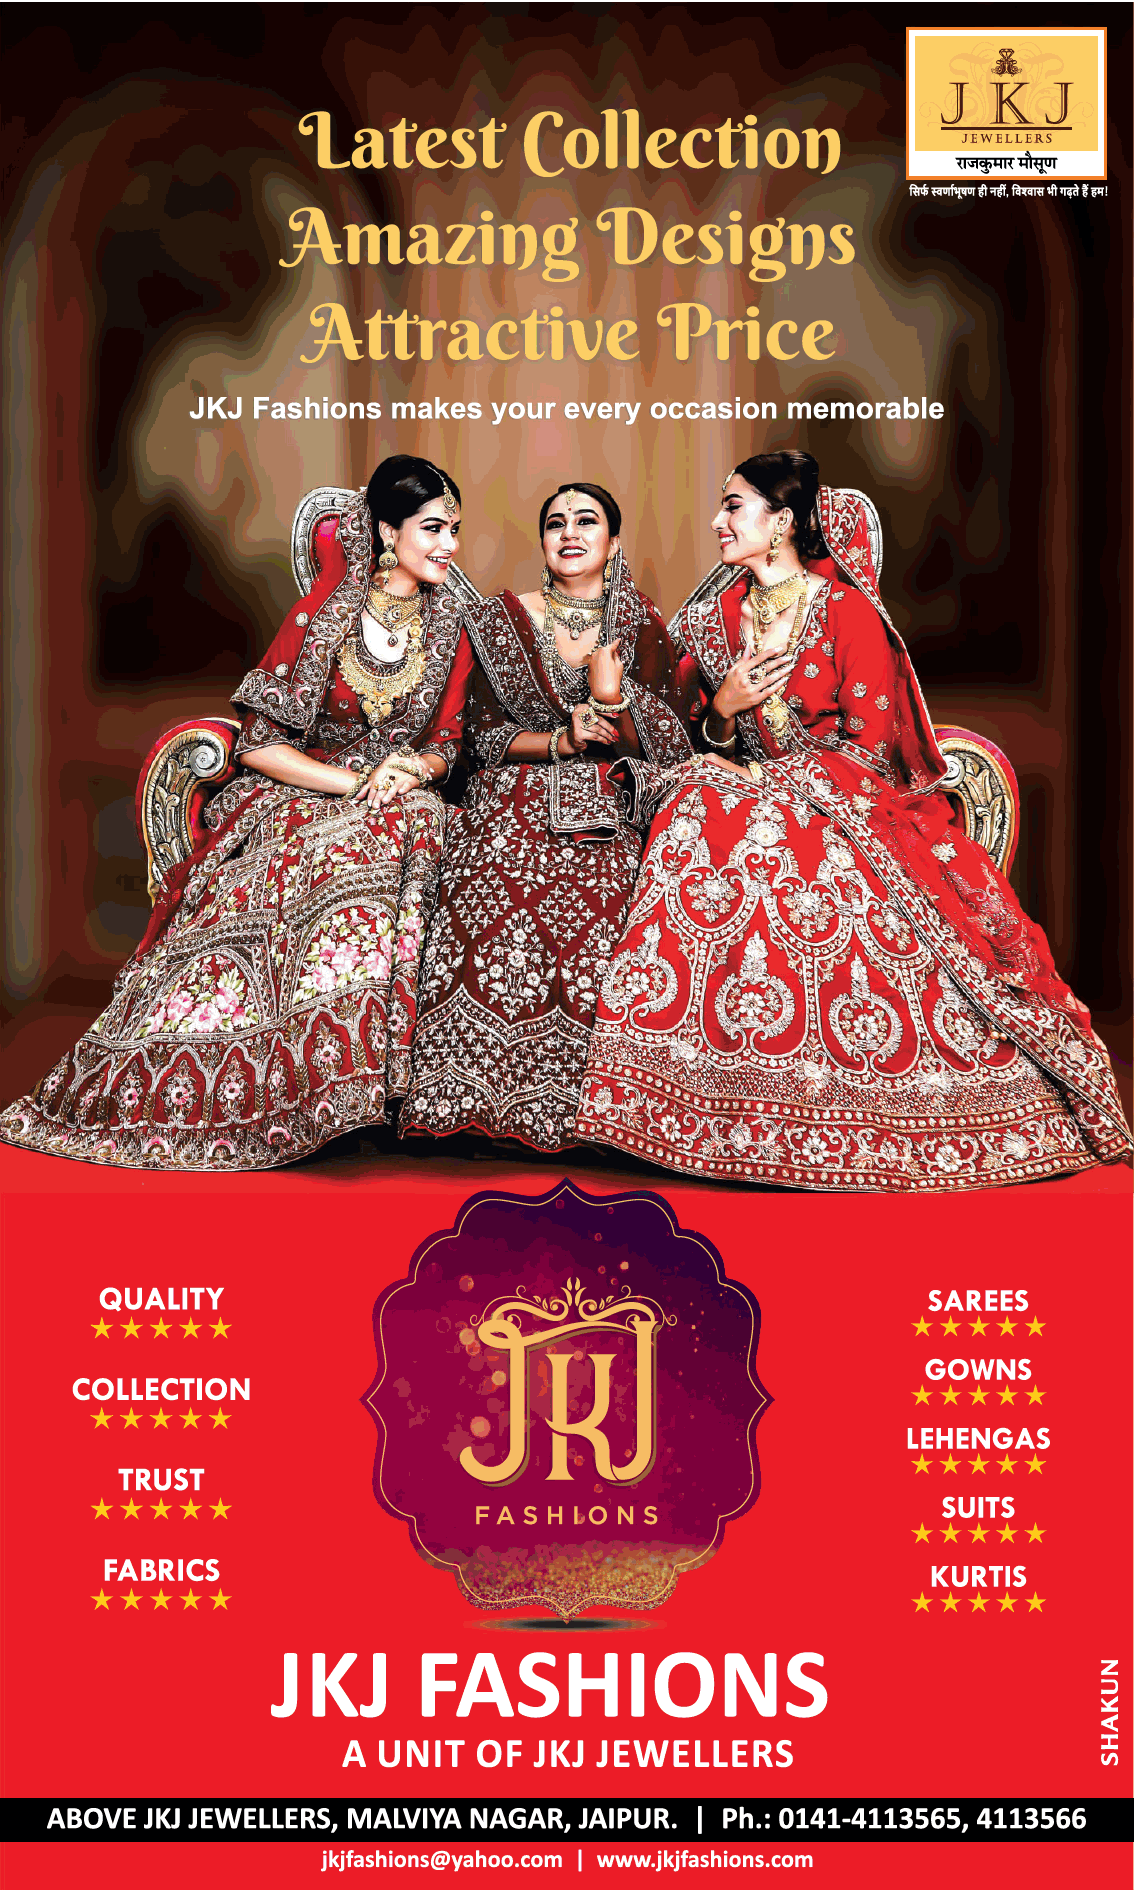 j-k-j-jewellers--j-k-j-fashion-latest-collection-amazing-designs-attractive-price-ad-times-of-india-jaipur-10-7-2021